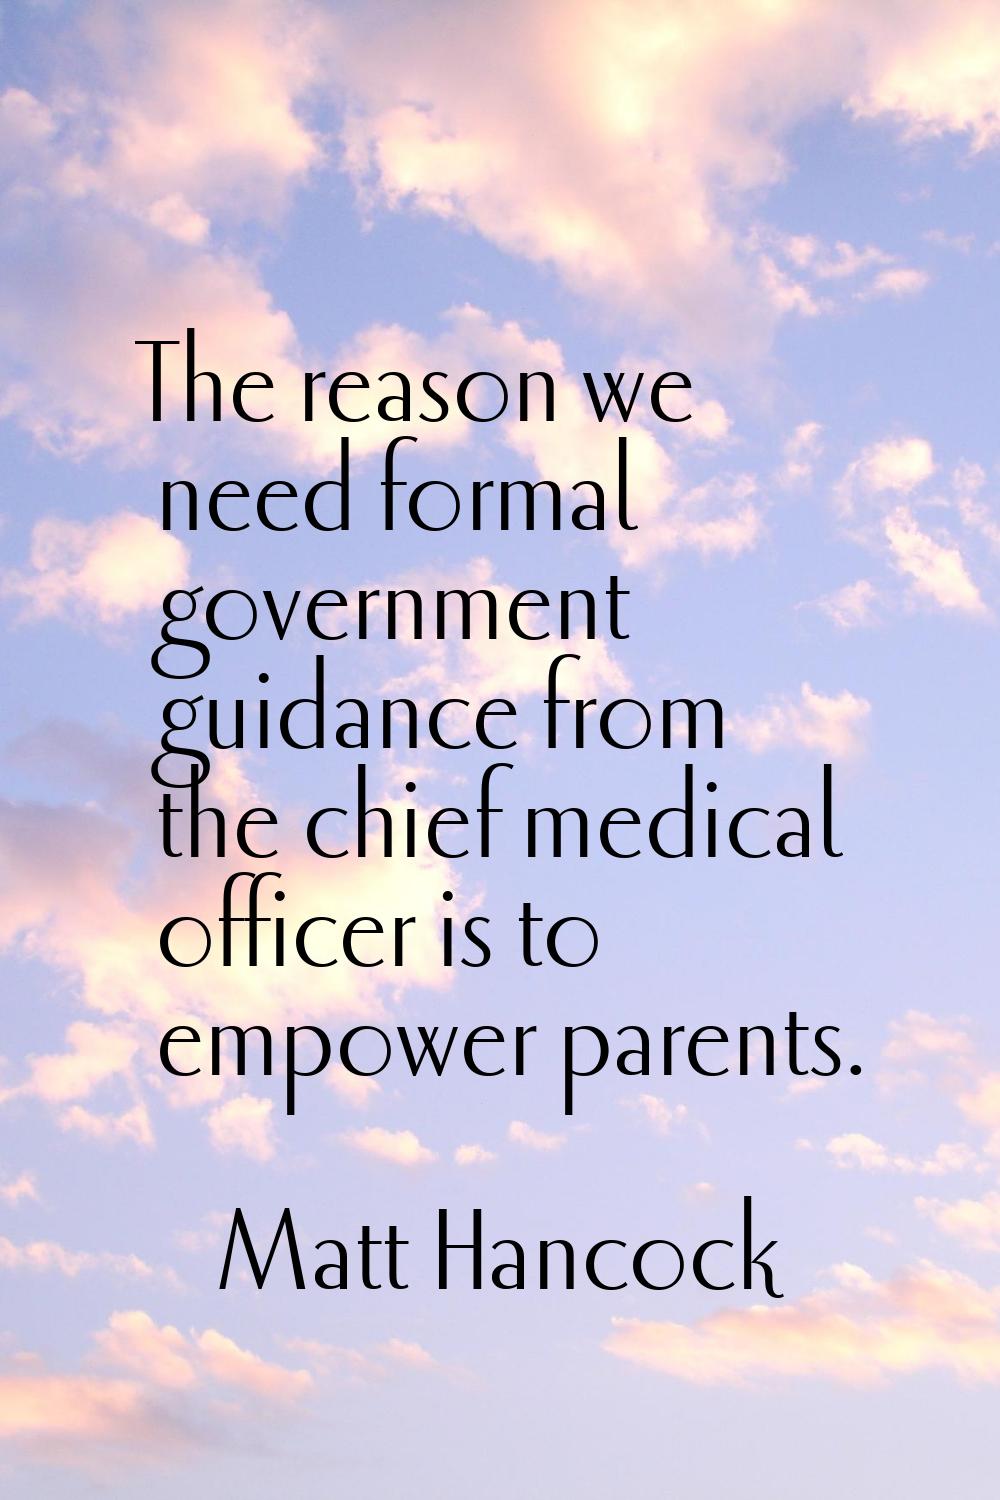 The reason we need formal government guidance from the chief medical officer is to empower parents.